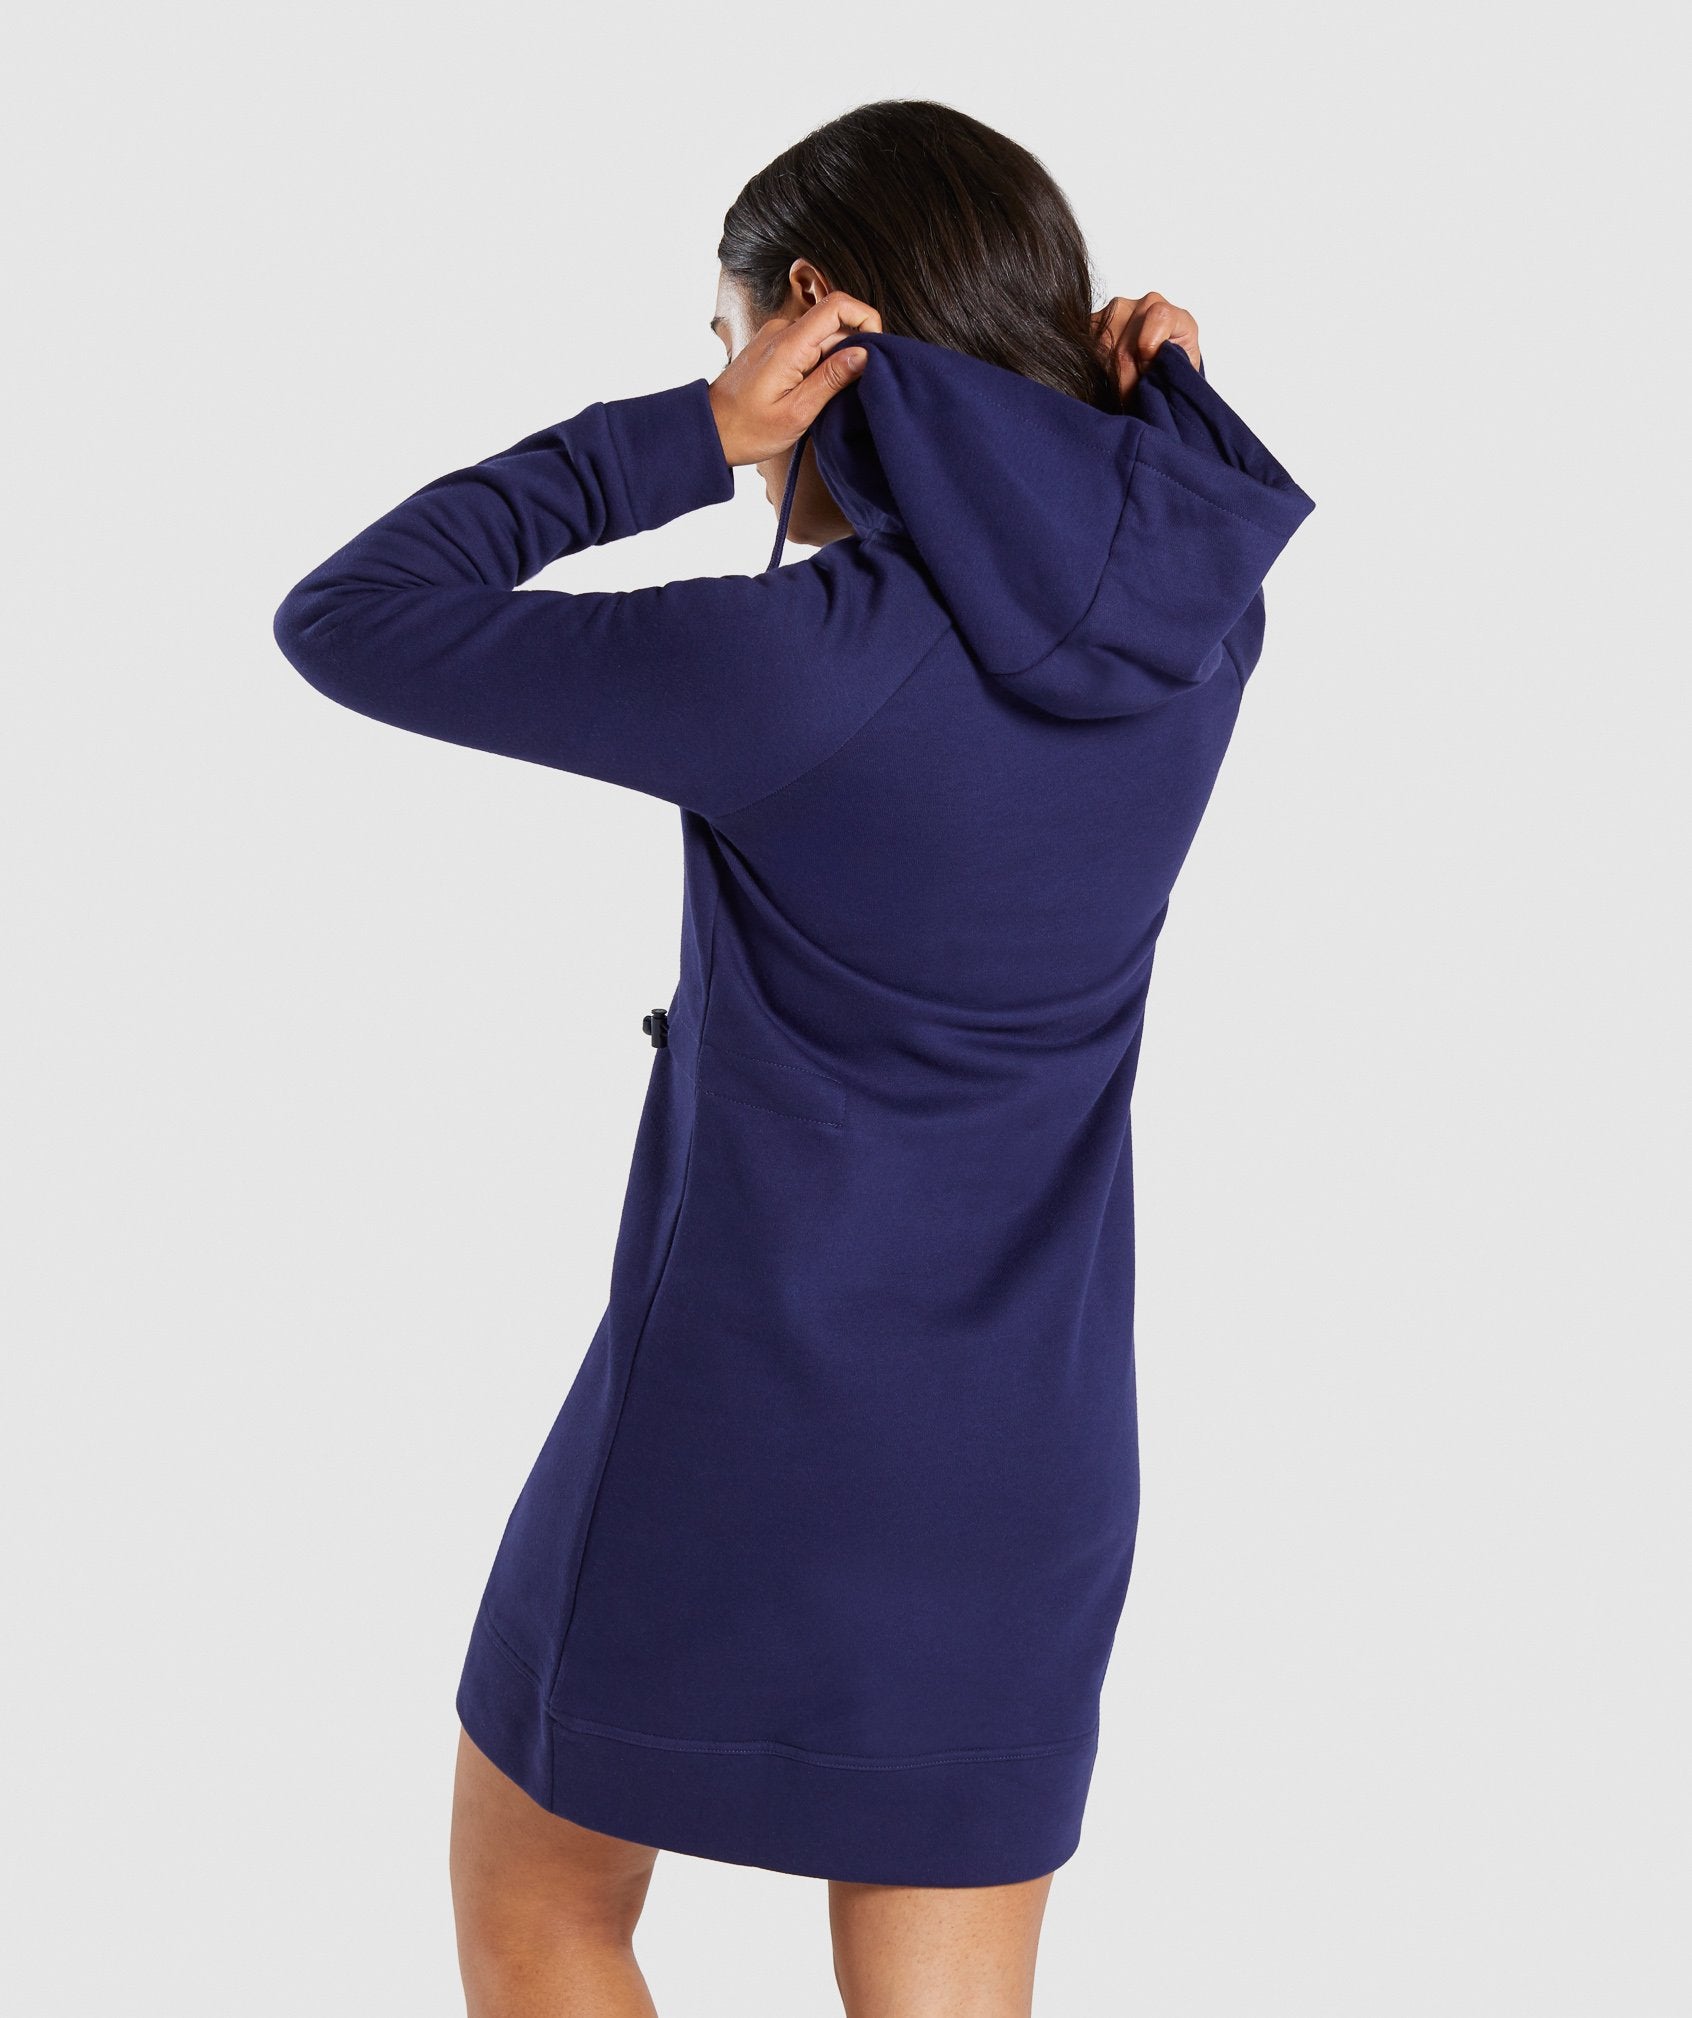 Slim Fit Hooded Dress in Evening Navy Blue - view 2